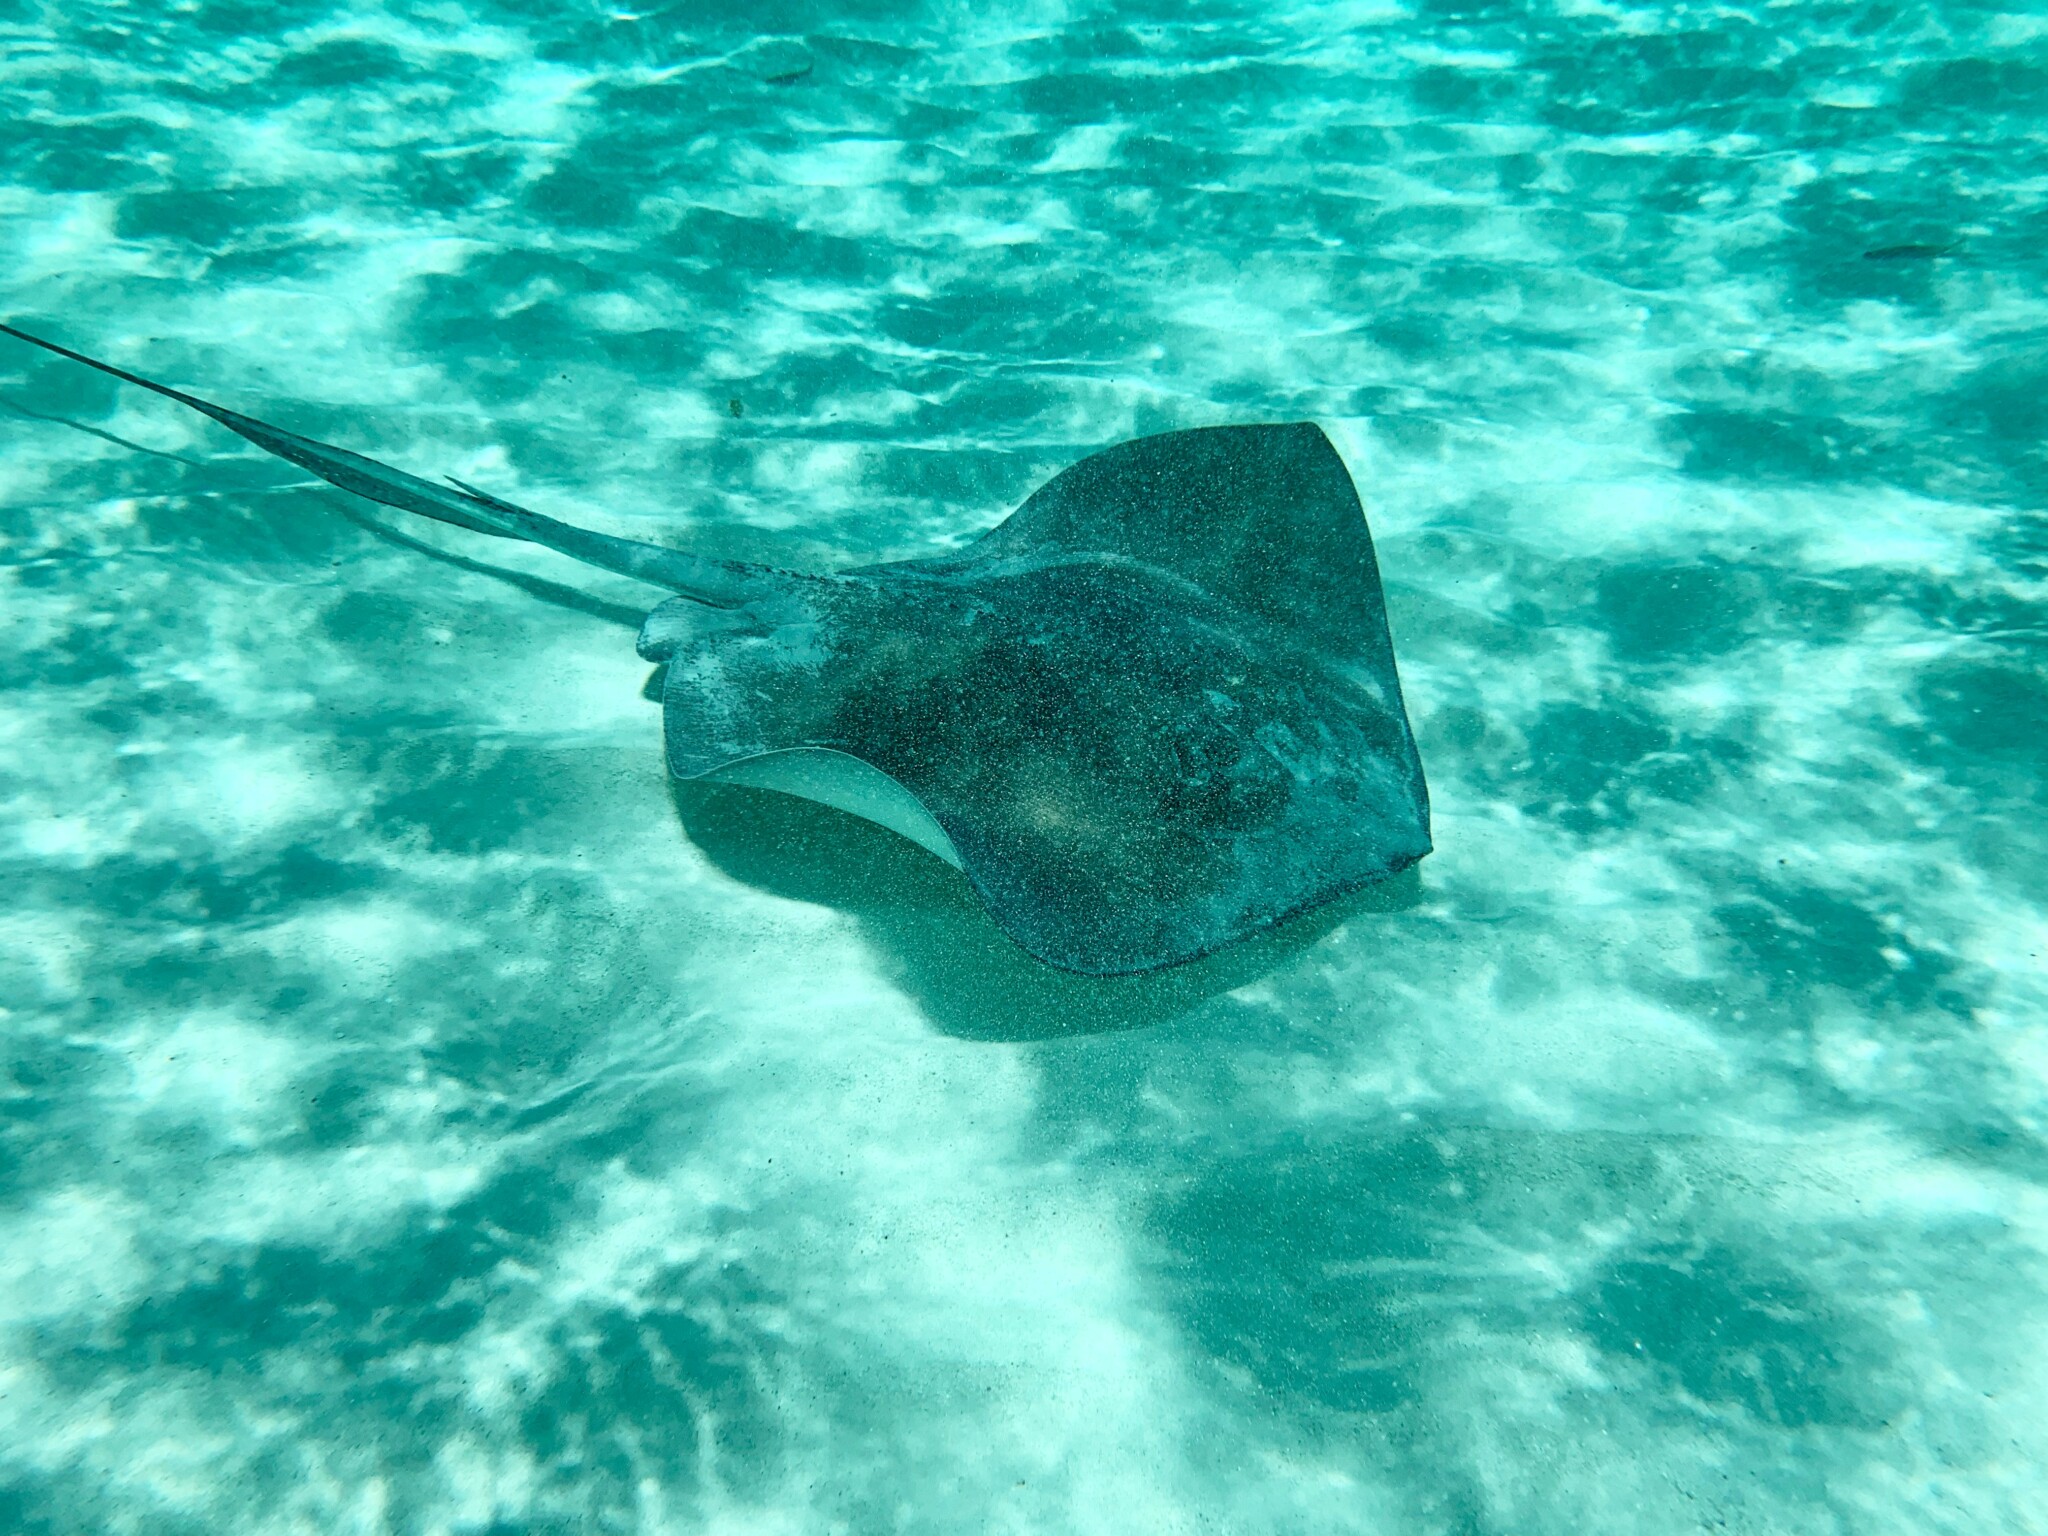 Stingray Stings: How to Avoid and Treat Them